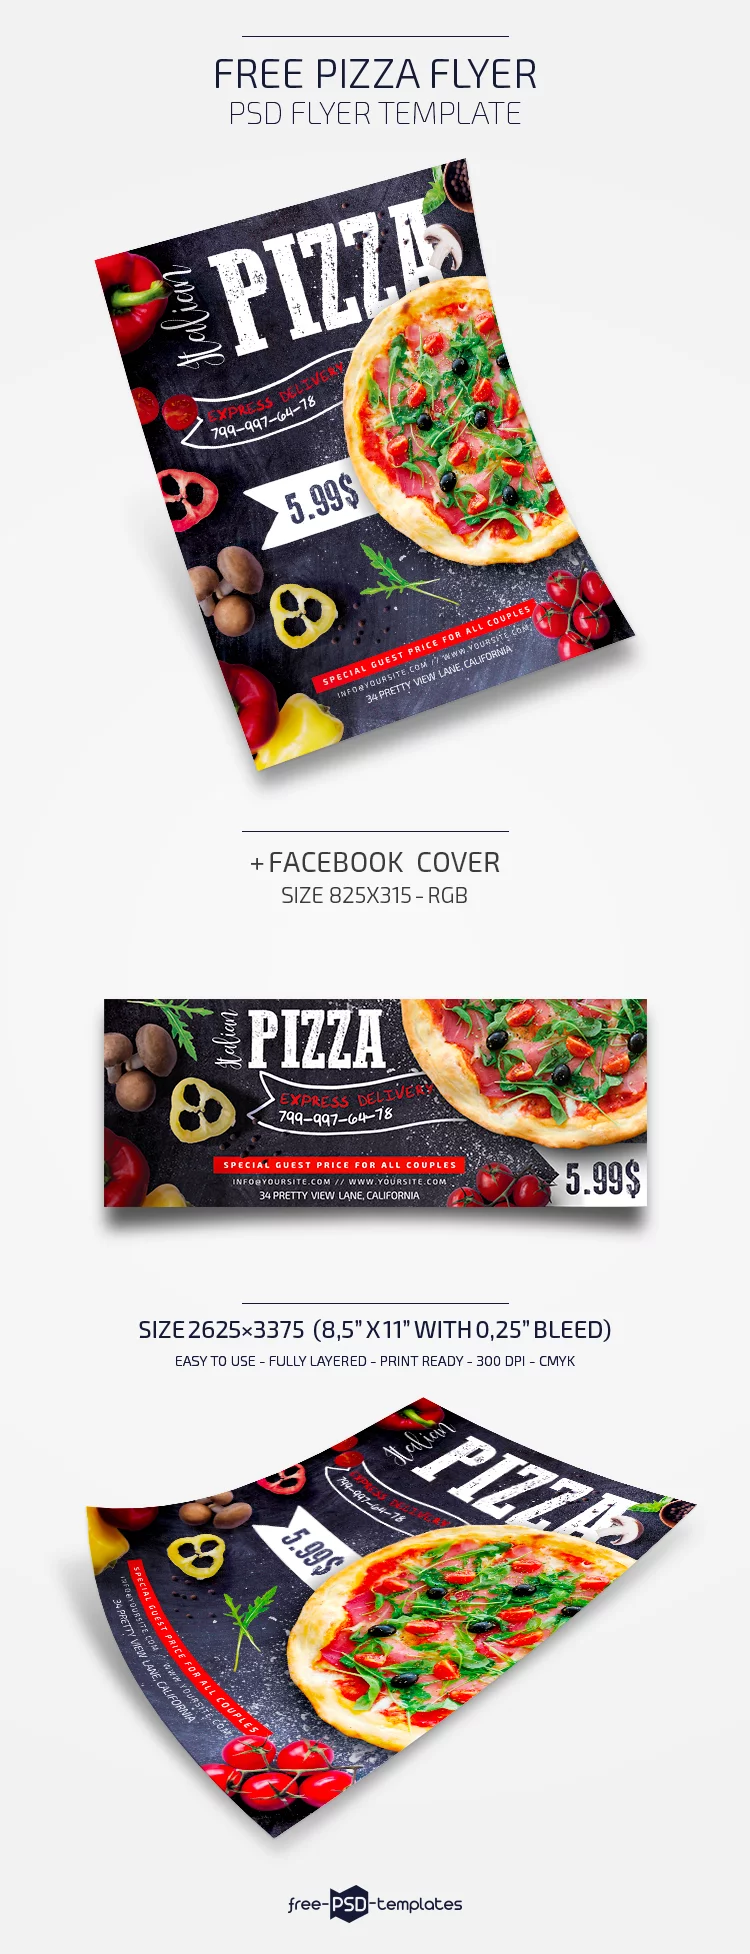 Free Pizza Flyer in PSD